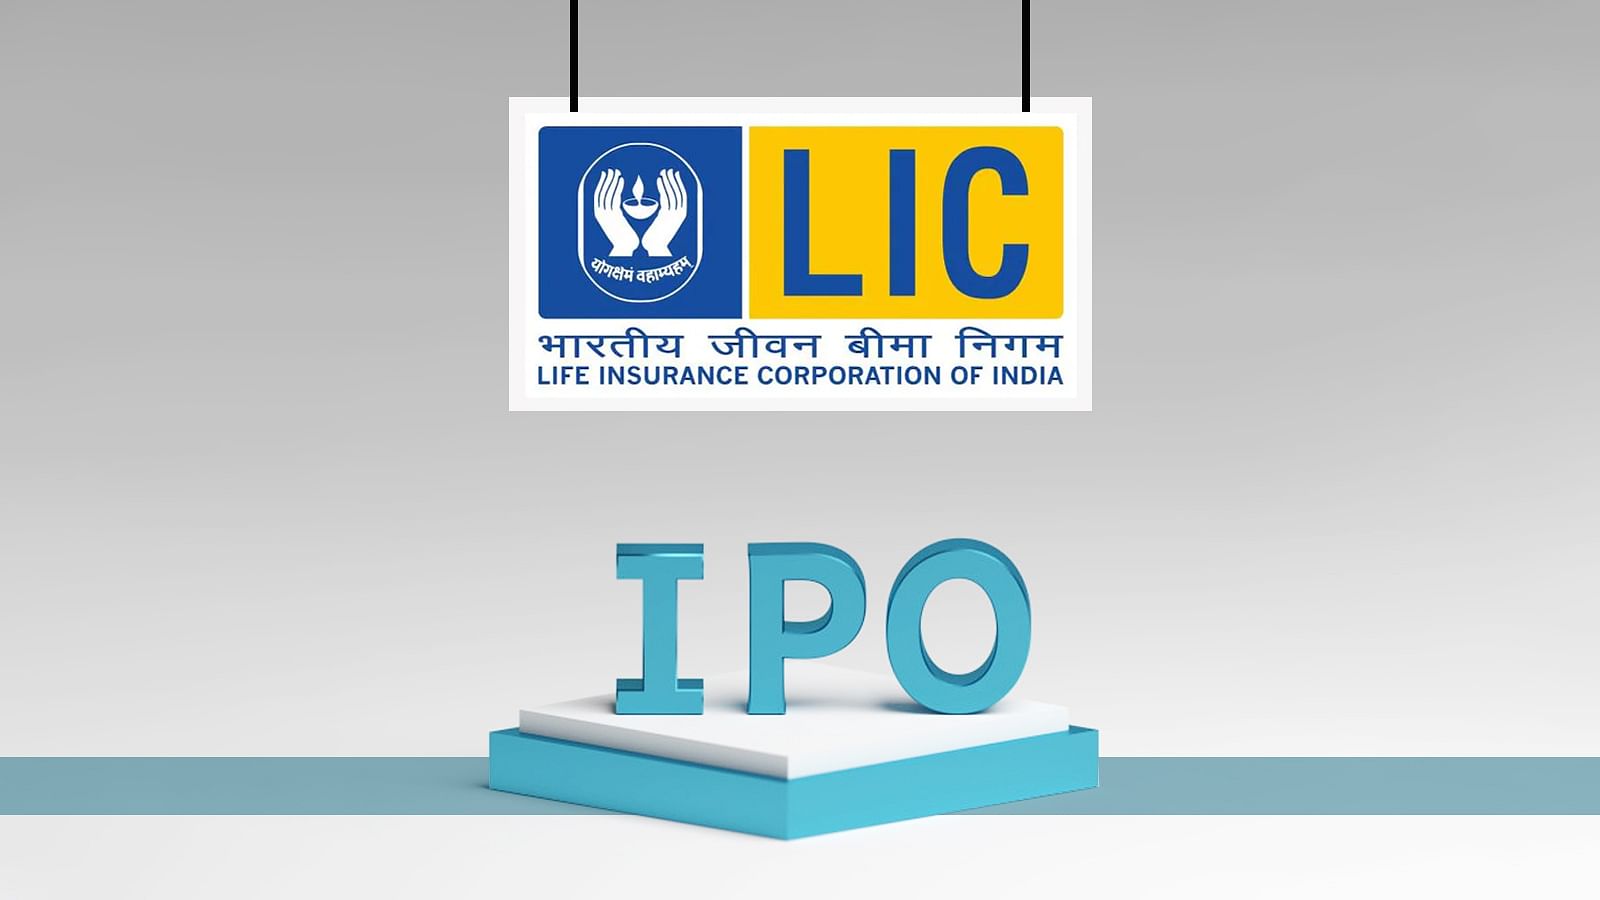 lic to file draft ipo papers with sebi next month | passionate in marketing